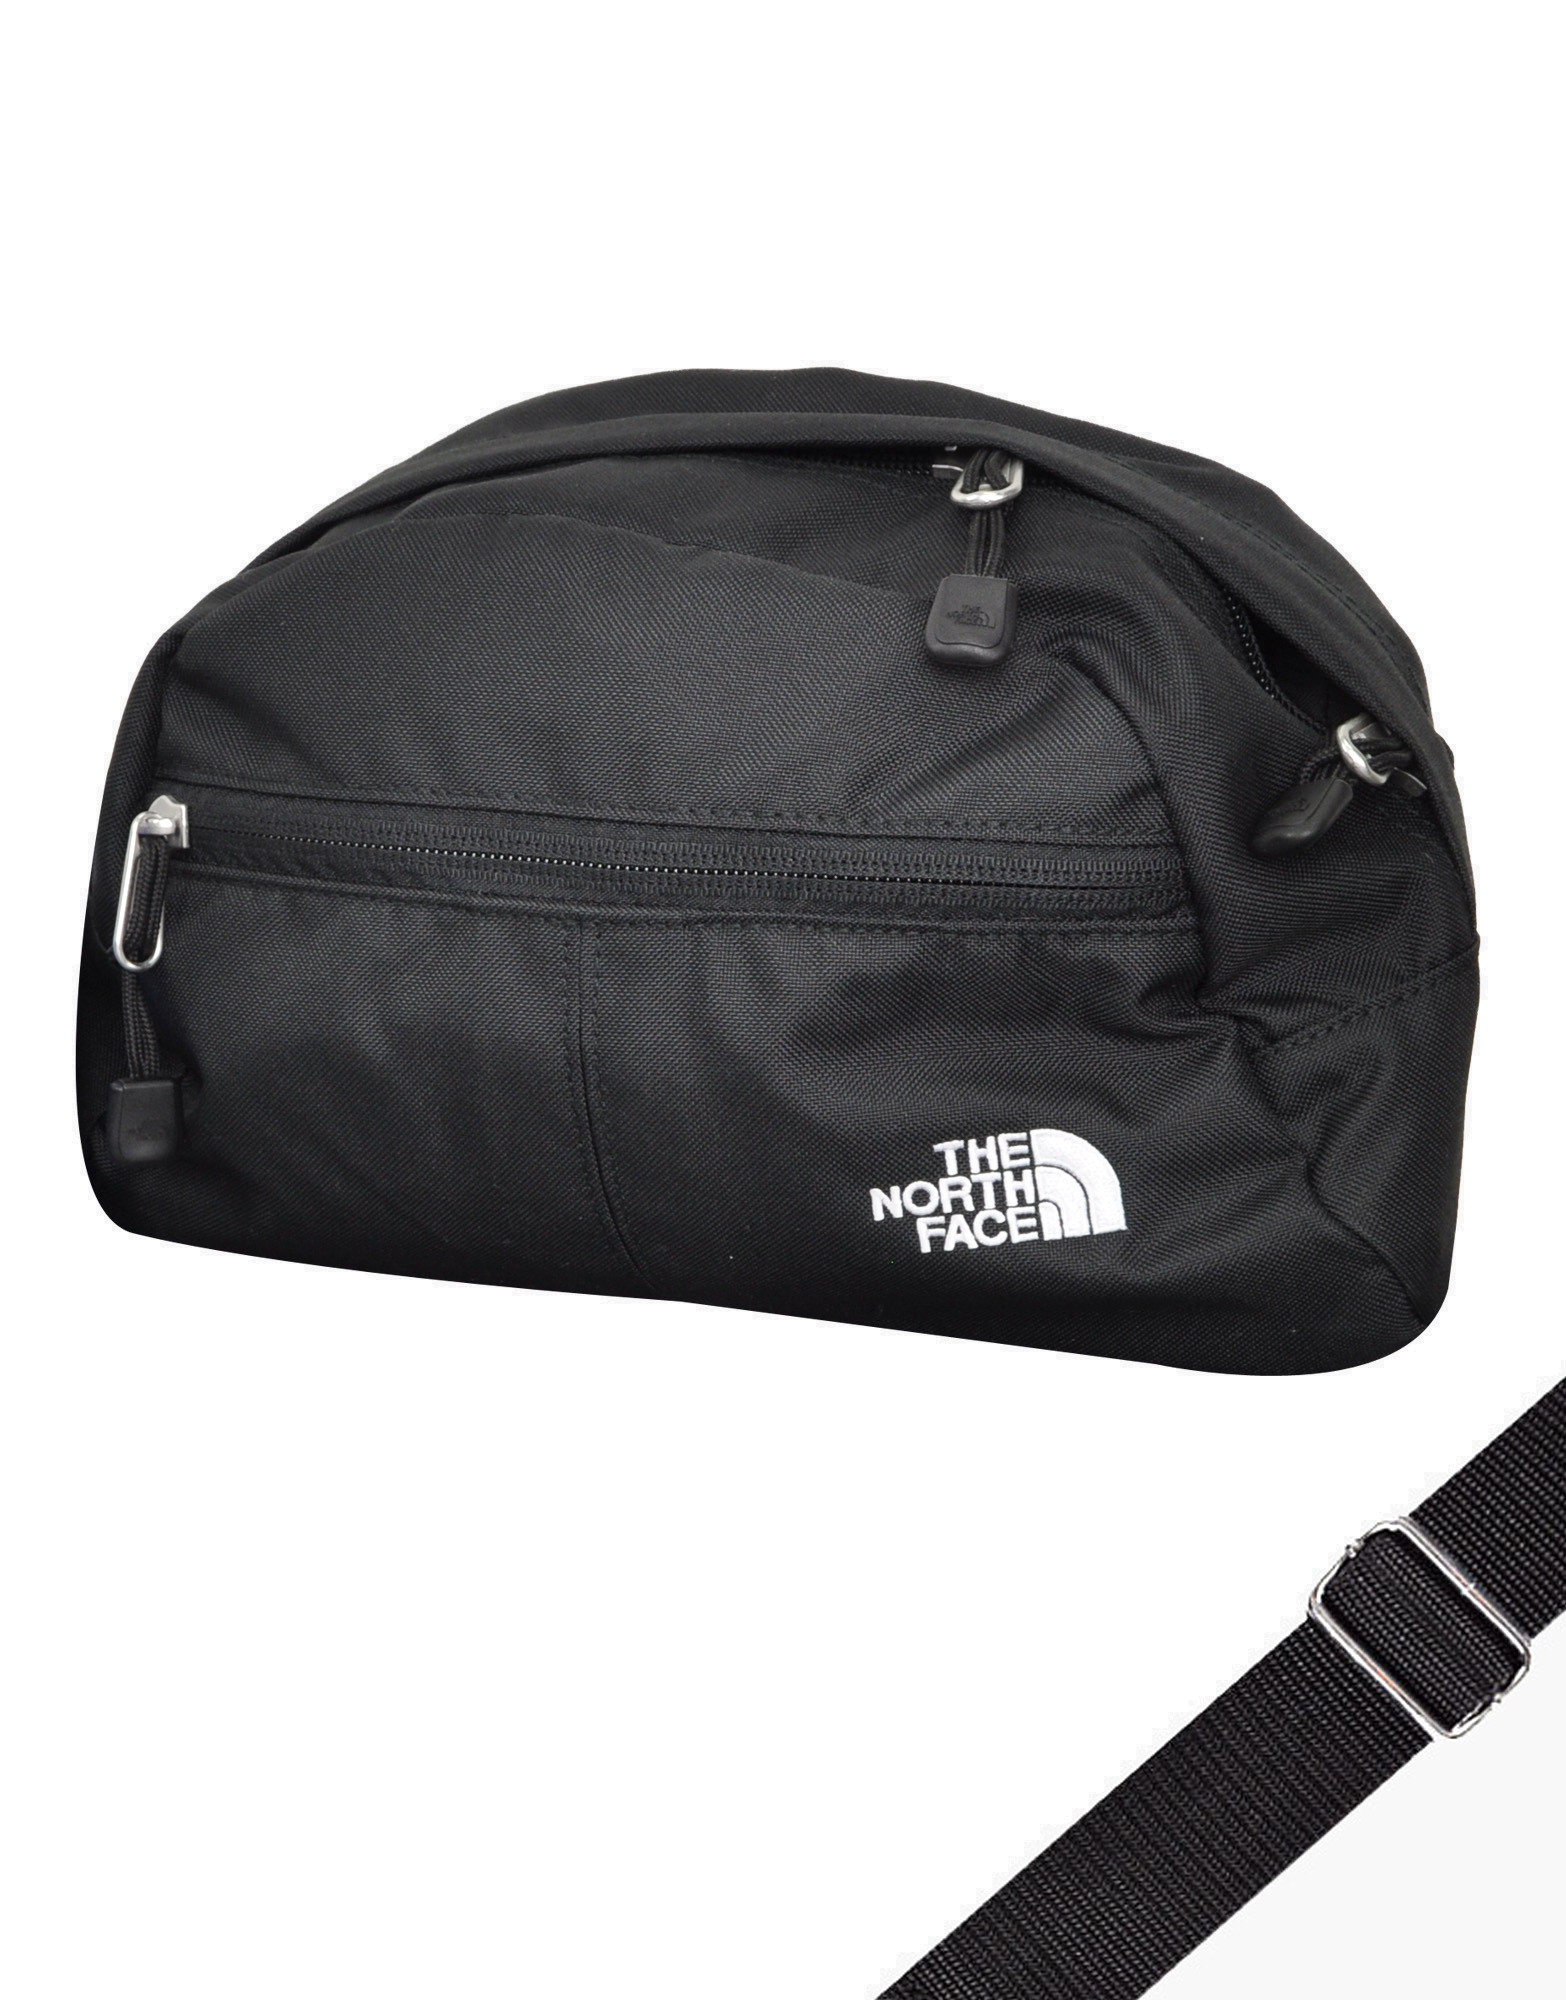 Roo II Waist Pack by THE NORTH FACE (colour: black) $ 13,80